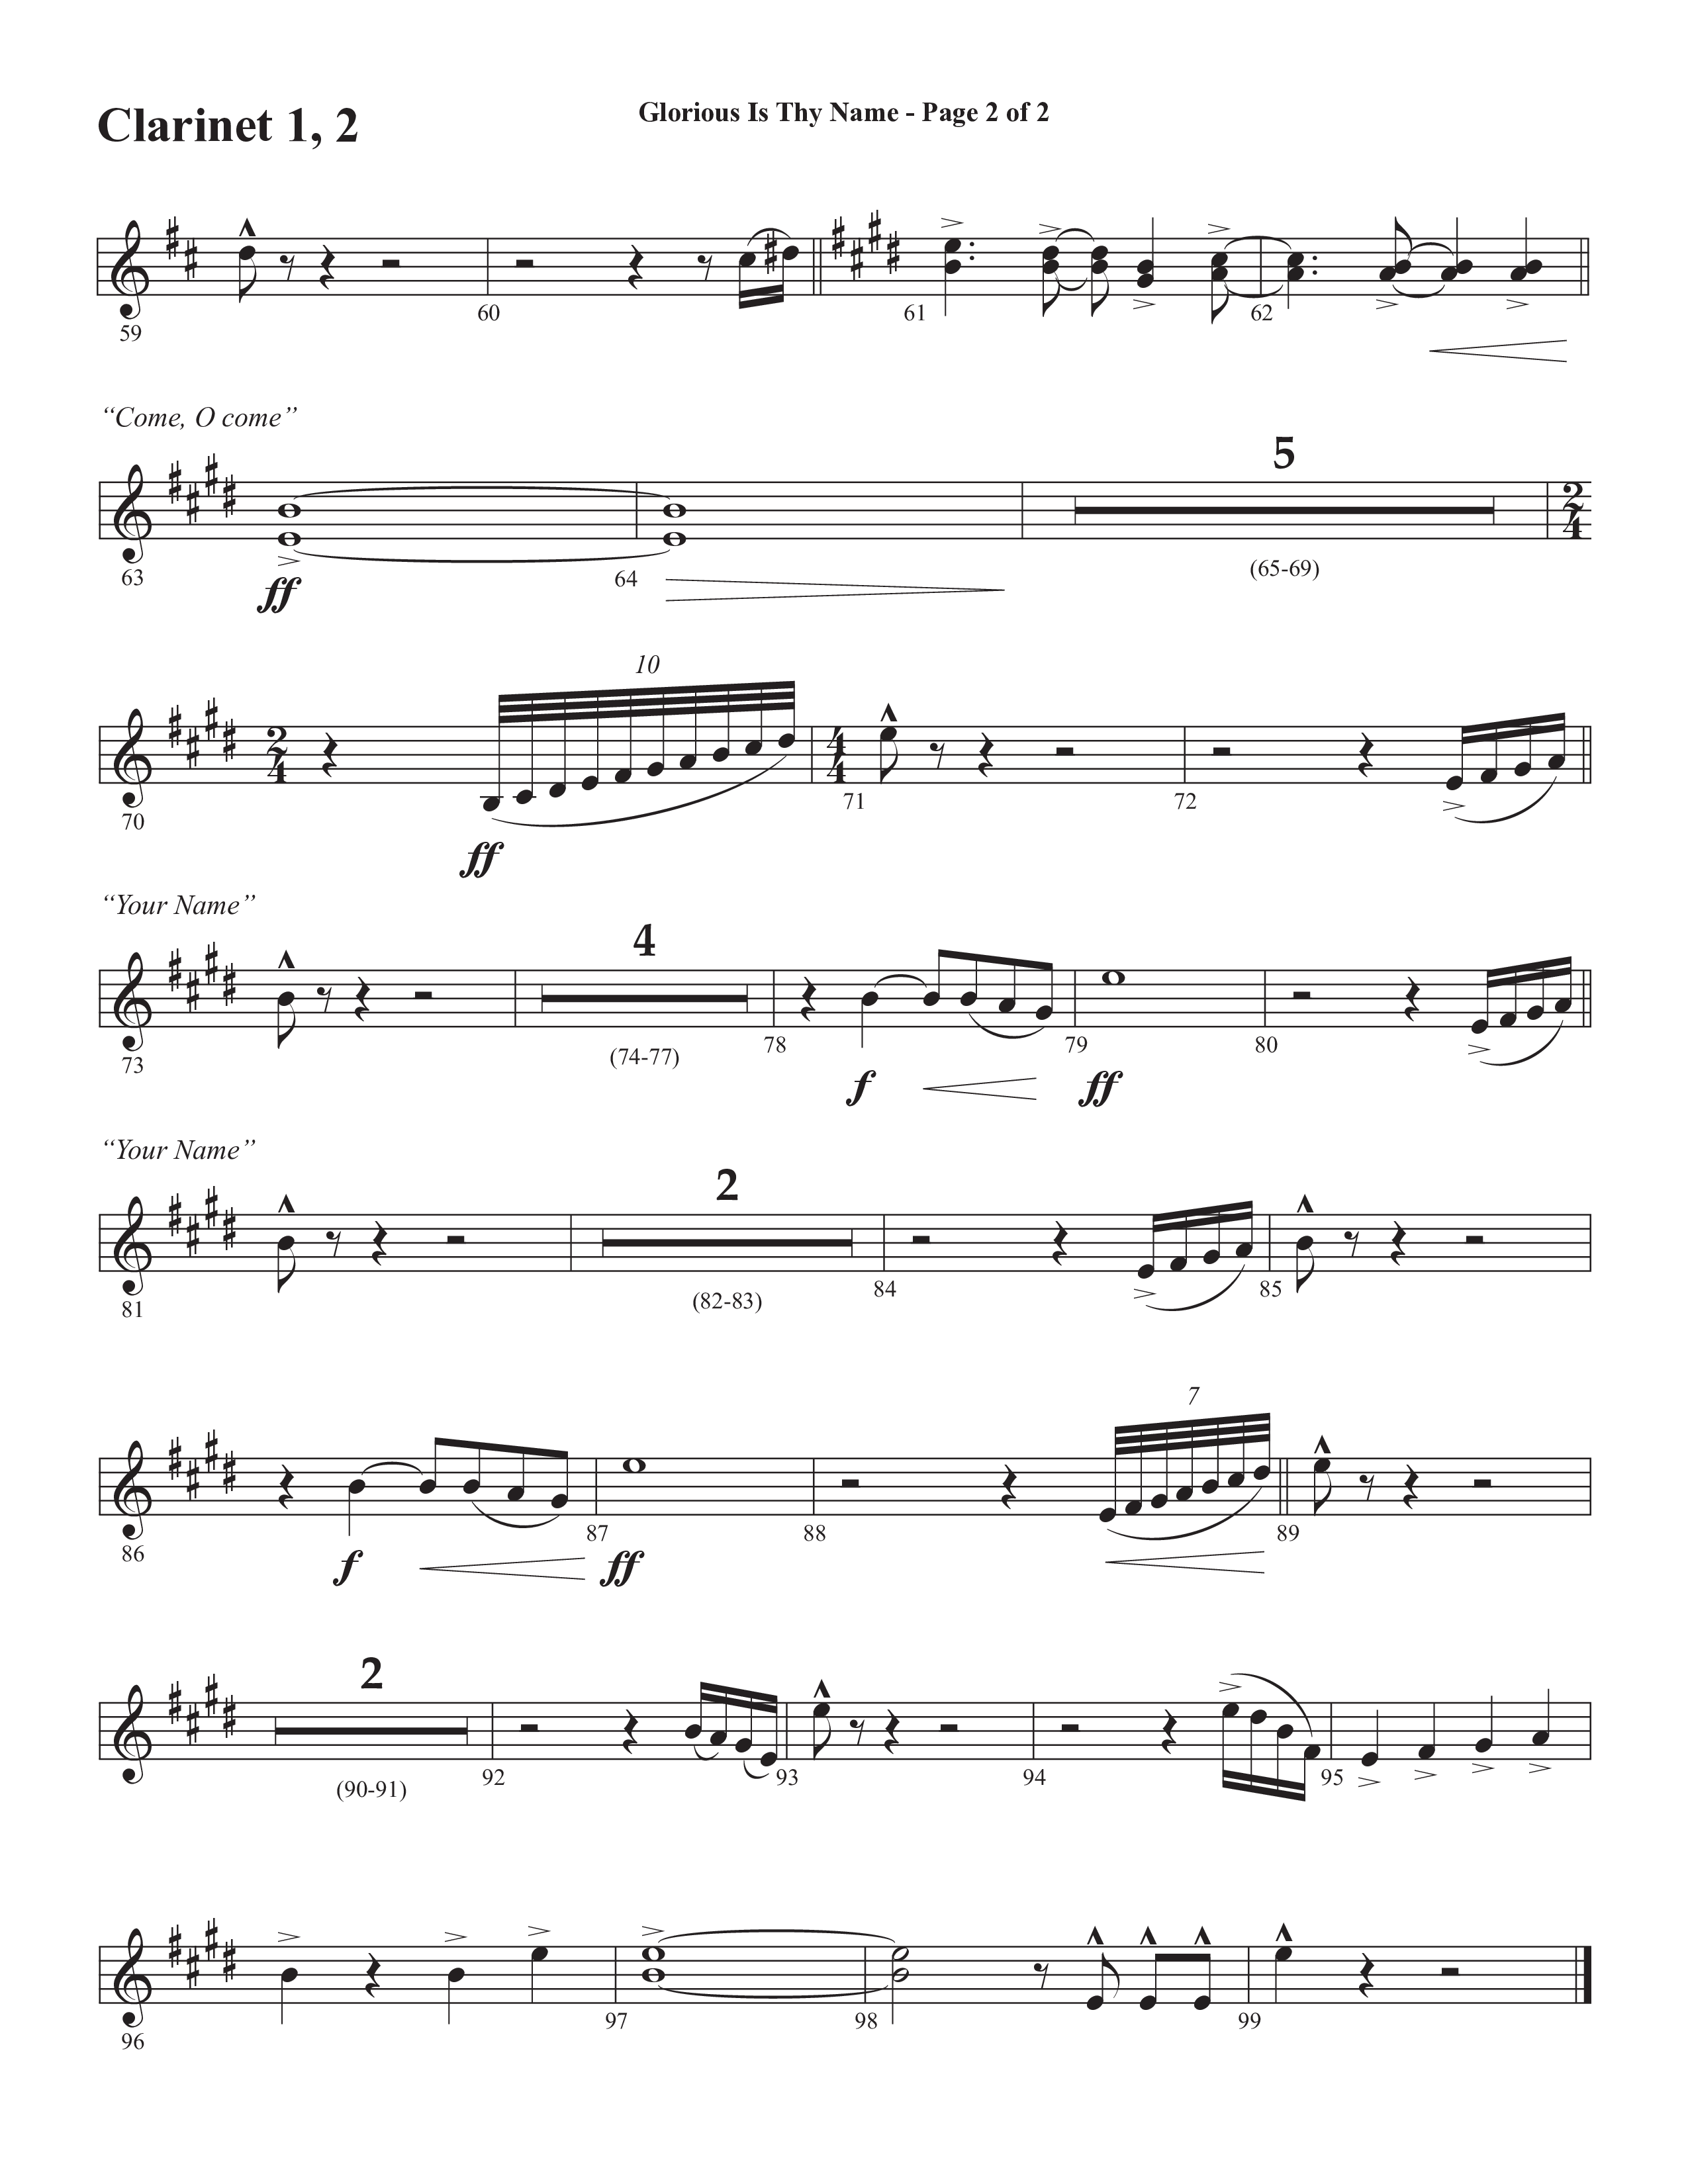 Glorious Is Thy Name (with Your Name) (Choral Anthem SATB) Clarinet 1/2 (Semsen Music / Arr. John Bolin / Orch. Cliff Duren)